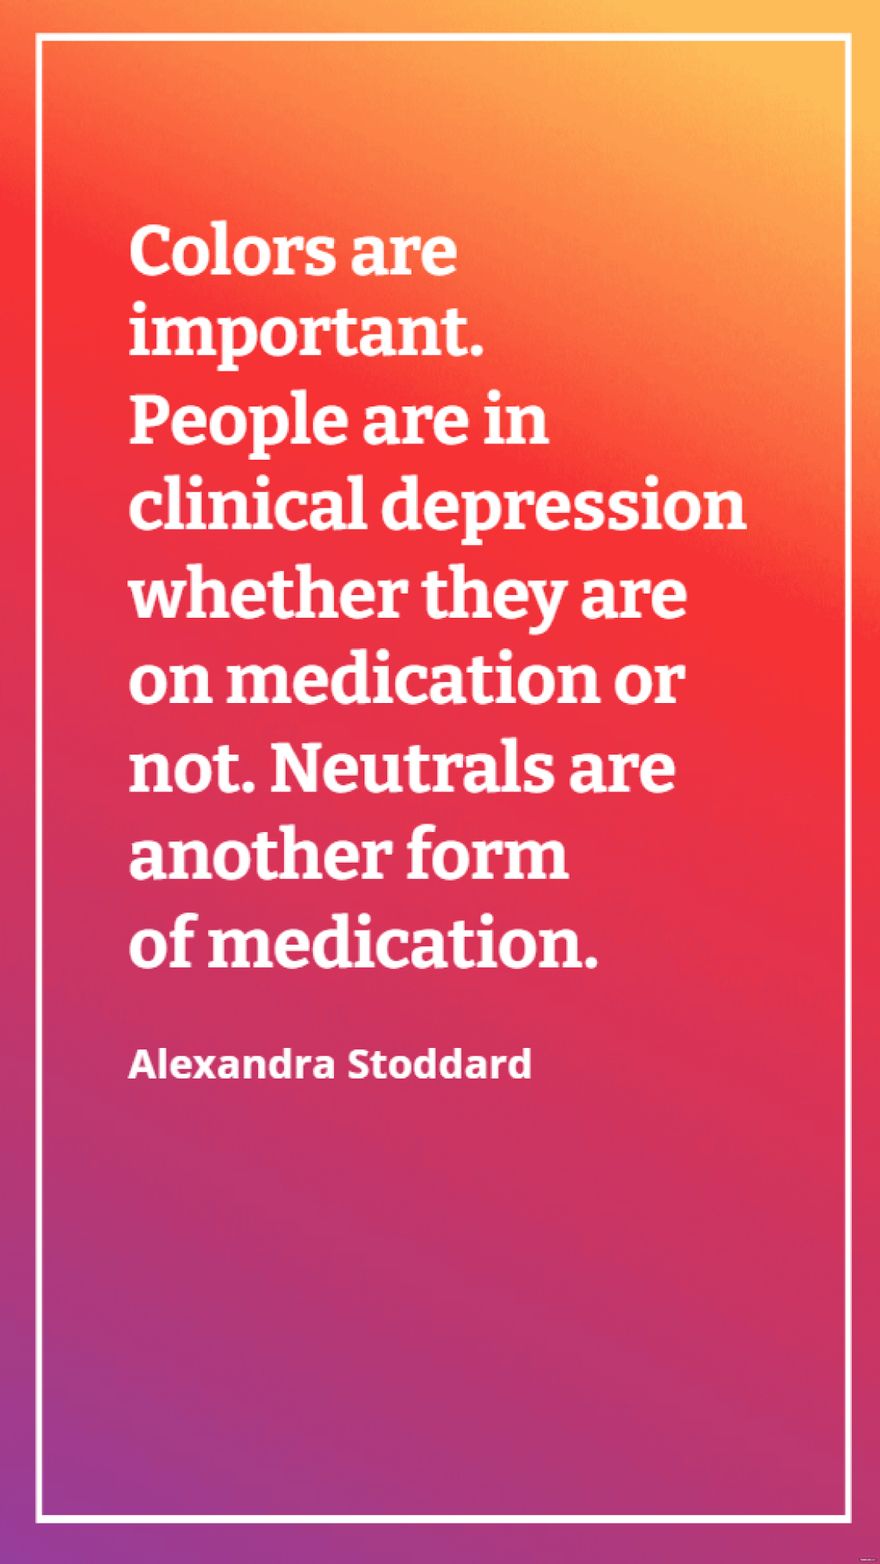 Alexandra Stoddard - Colors are important. People are in clinical depression whether they are on medication or not. Neutrals are another form of medication.